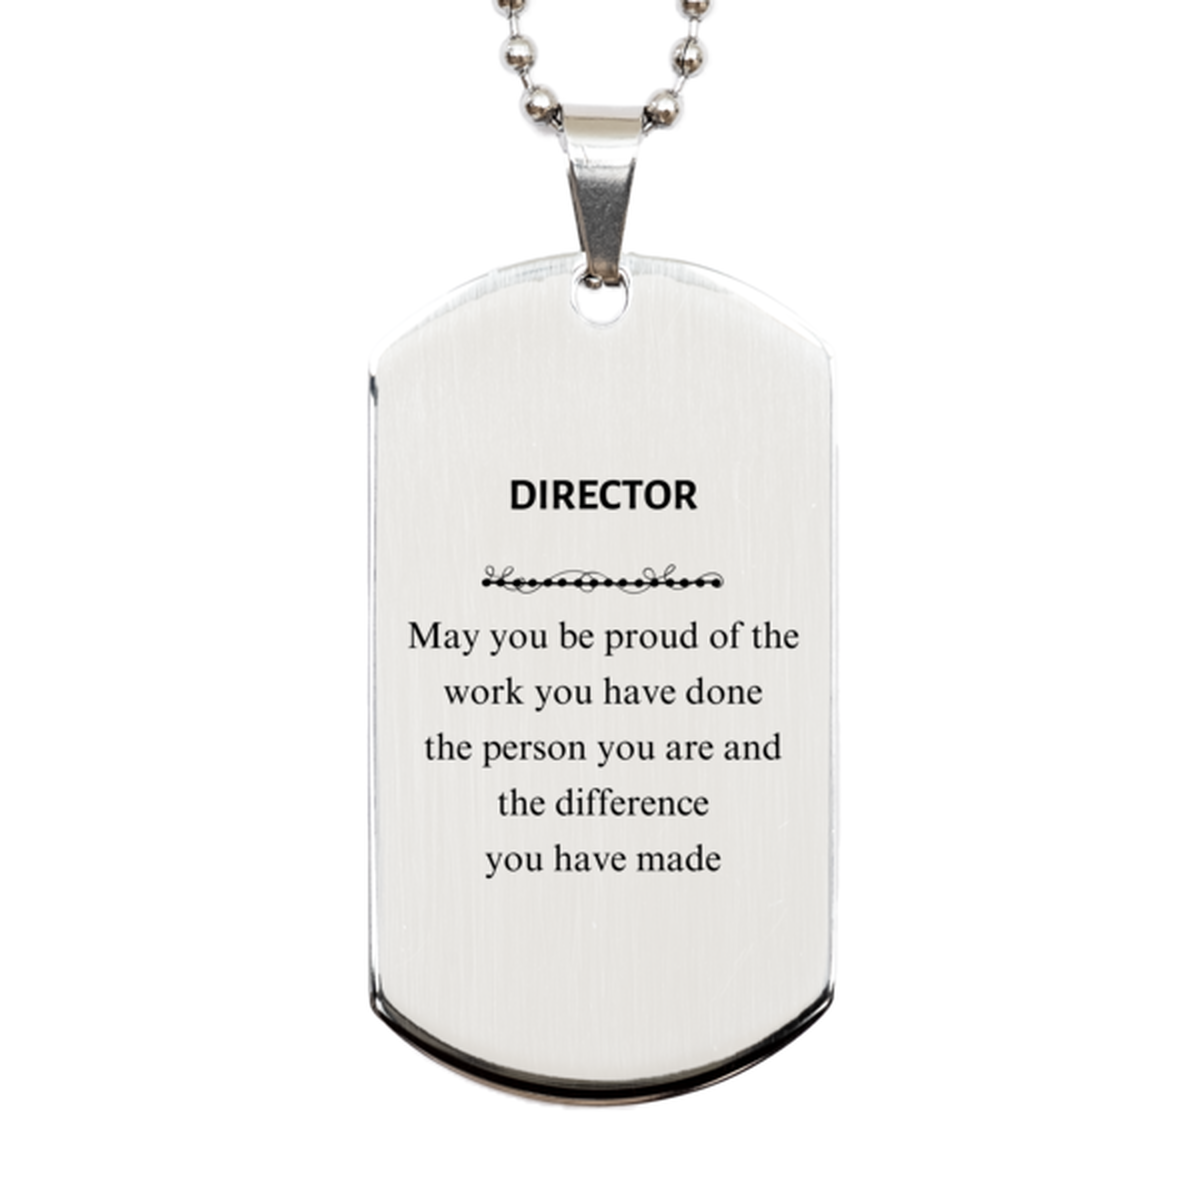 Director May you be proud of the work you have done, Retirement Director Silver Dog Tag for Colleague Appreciation Gifts Amazing for Director